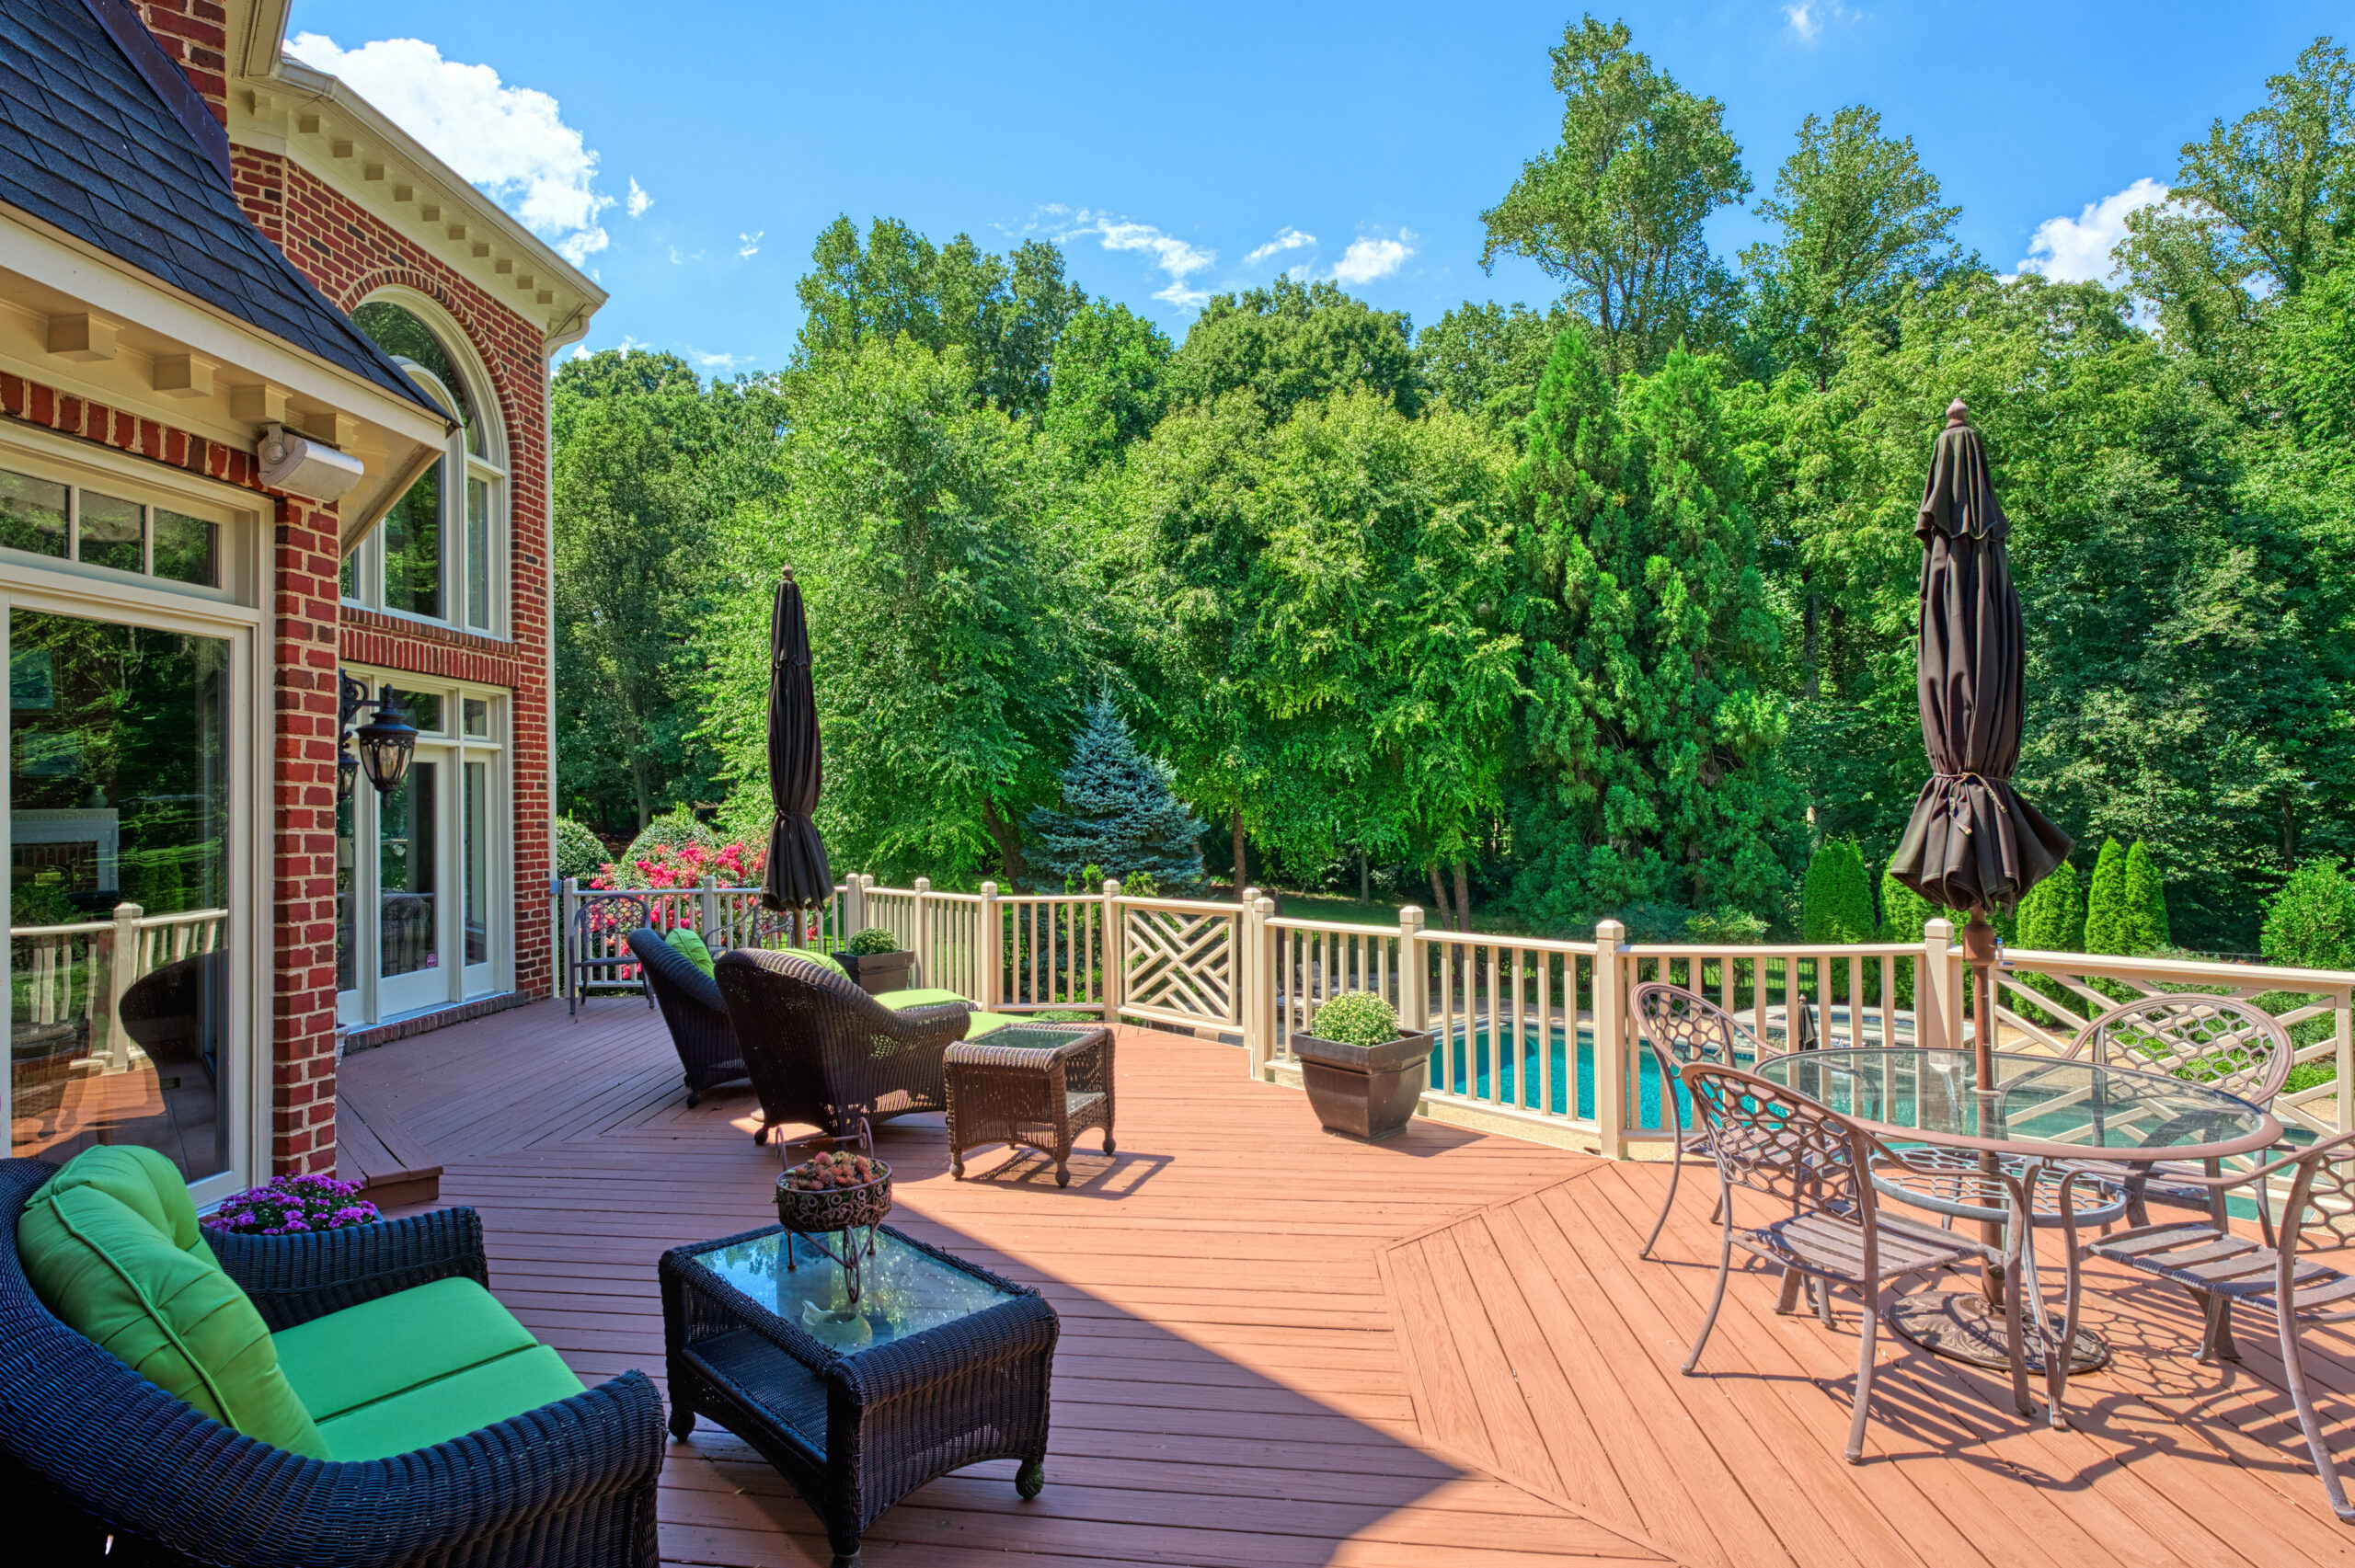 Professional exterior photo of 17087 Bold Venture Drive, Leesburg - showing the rear of the home from the large deck looking toward the pool